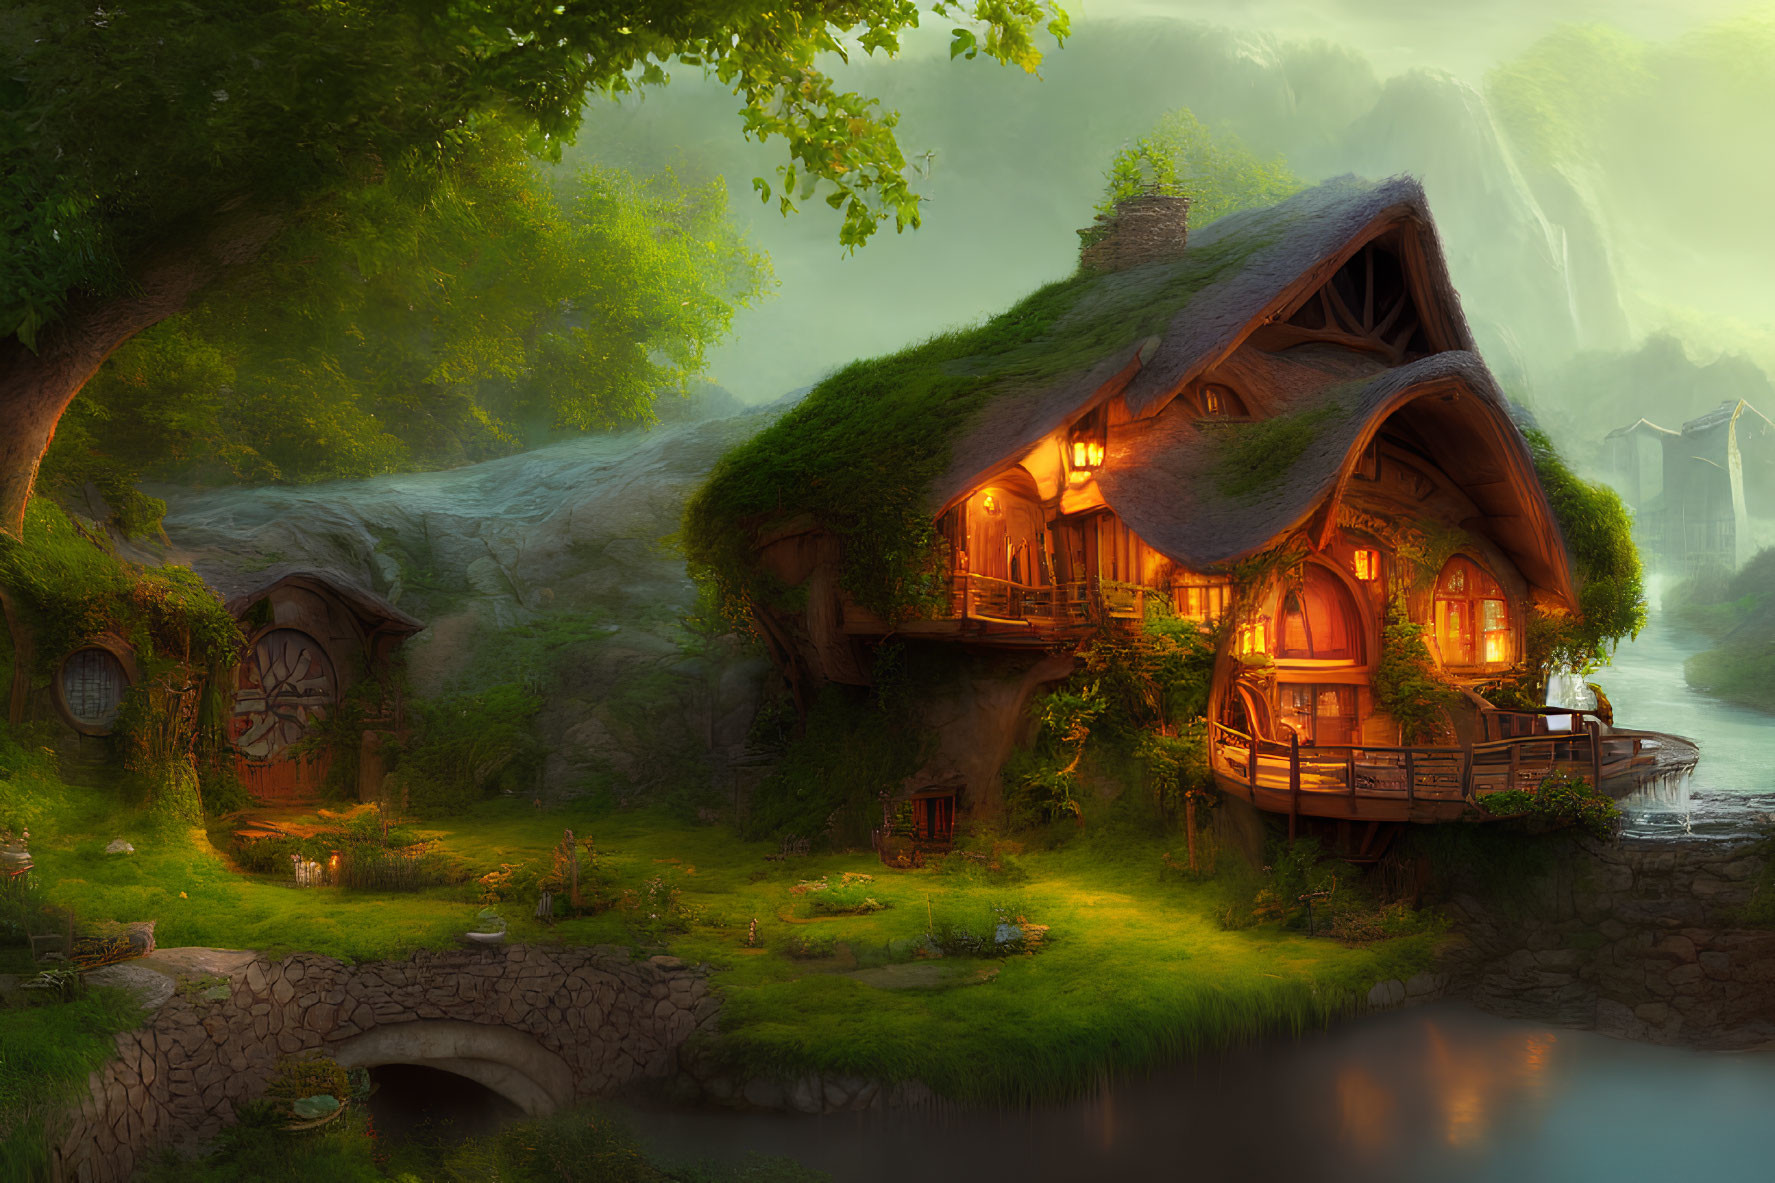 Cozy forest cottage with glowing windows by stream at twilight